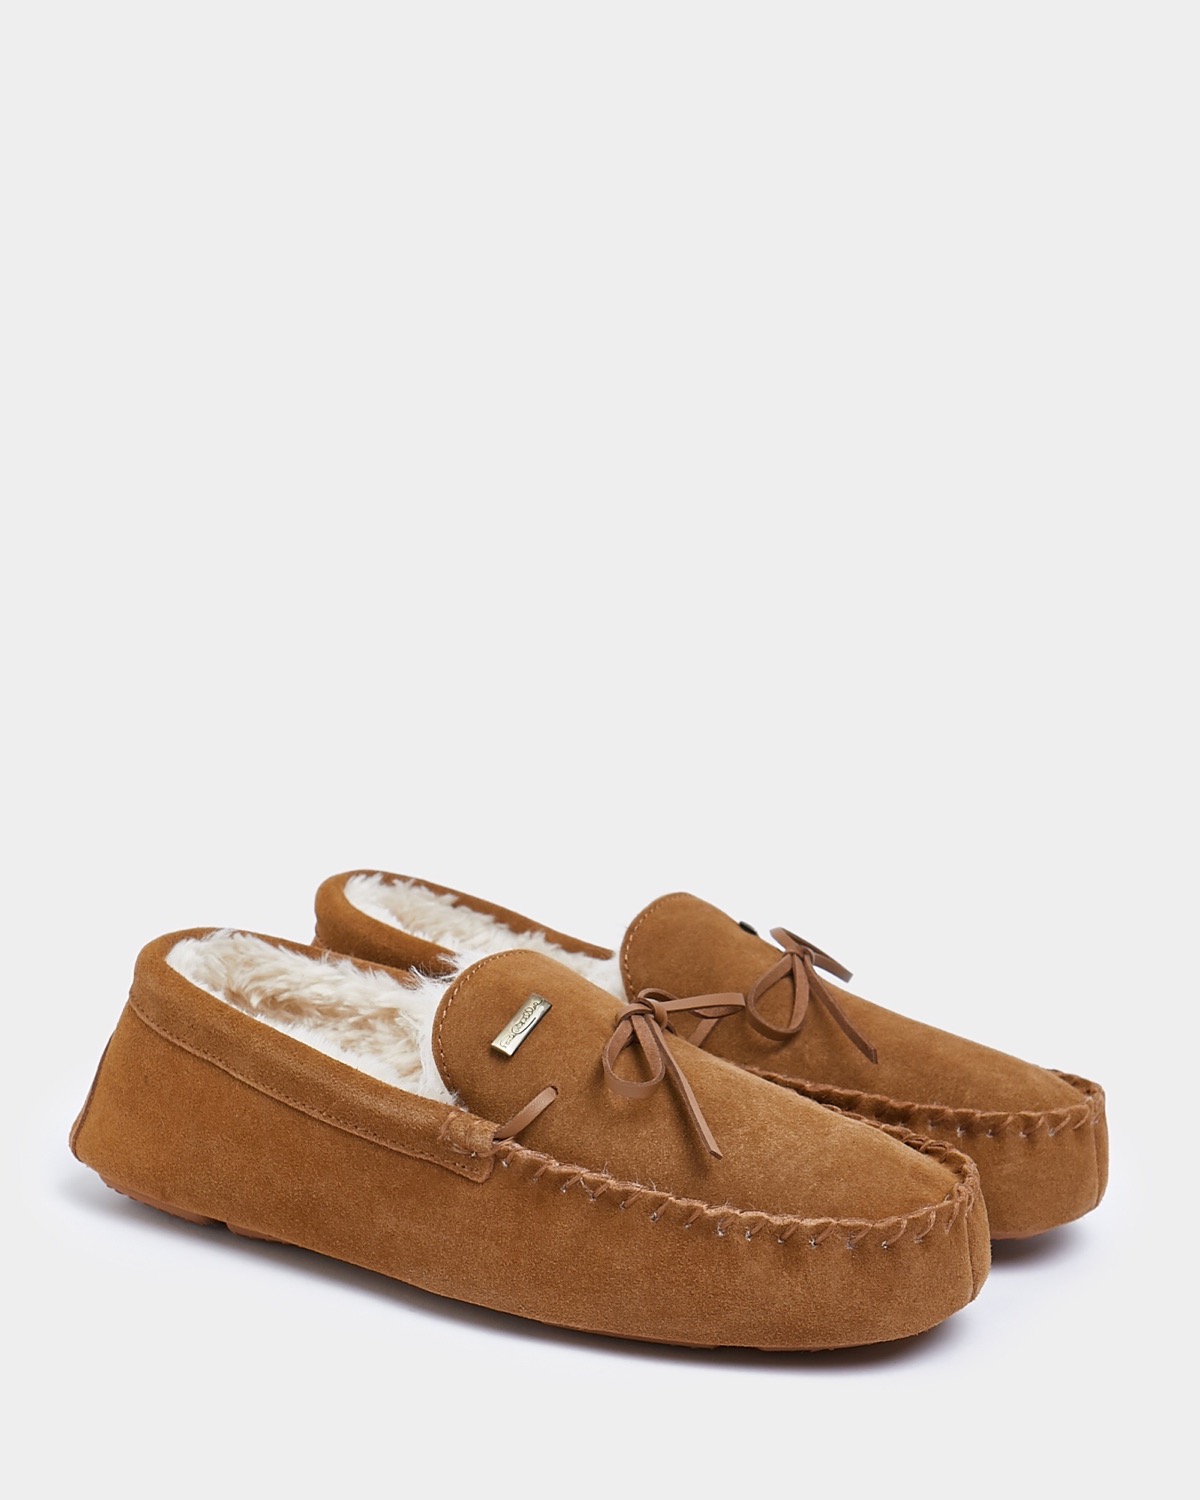 Dunnes Stores | Tan Paul Costelloe Living Boxed Suede Mocassin Slippers